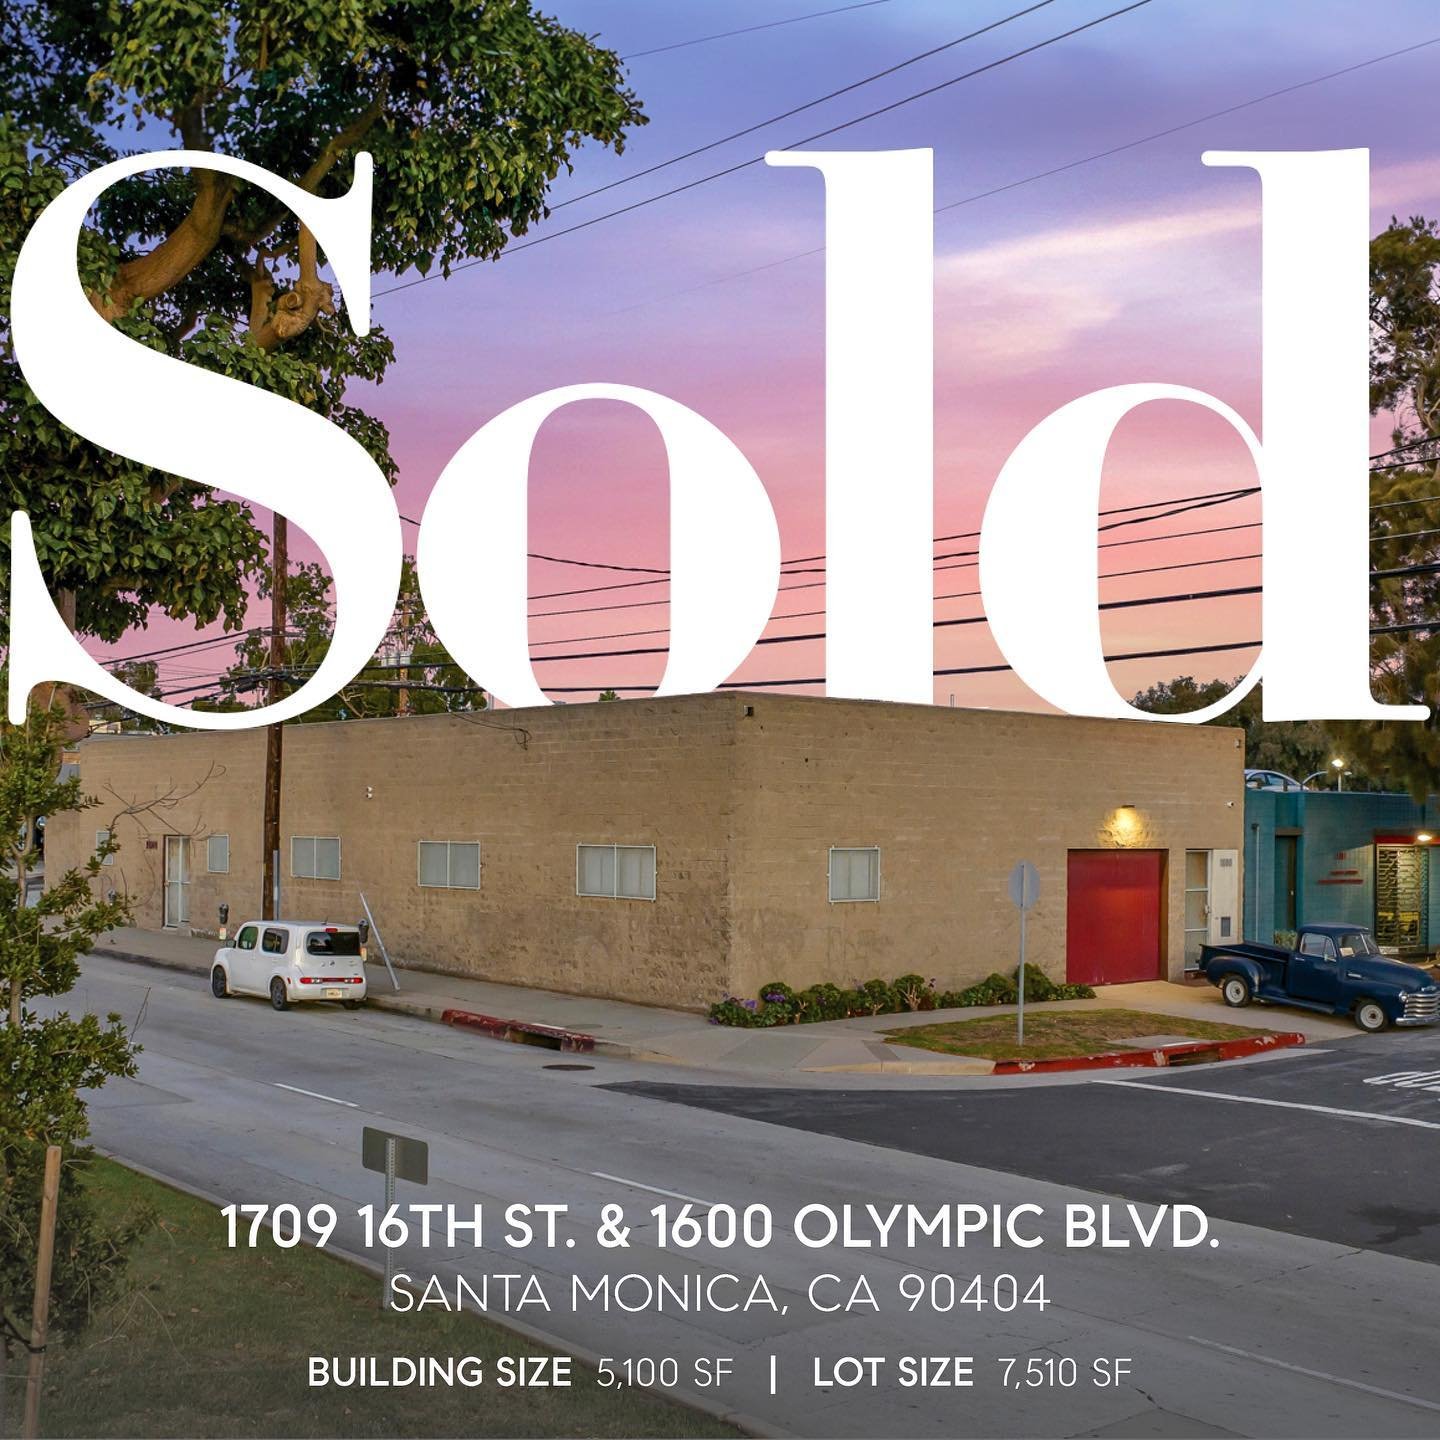 Celebrating the successful closing sale of this creative office building, conveniently situated across from the Buffalo Club in Santa Monica! 🥂🍾

It&rsquo;s been a cherished part of the family&rsquo;s portfolio for over four decades. Cheers to the 